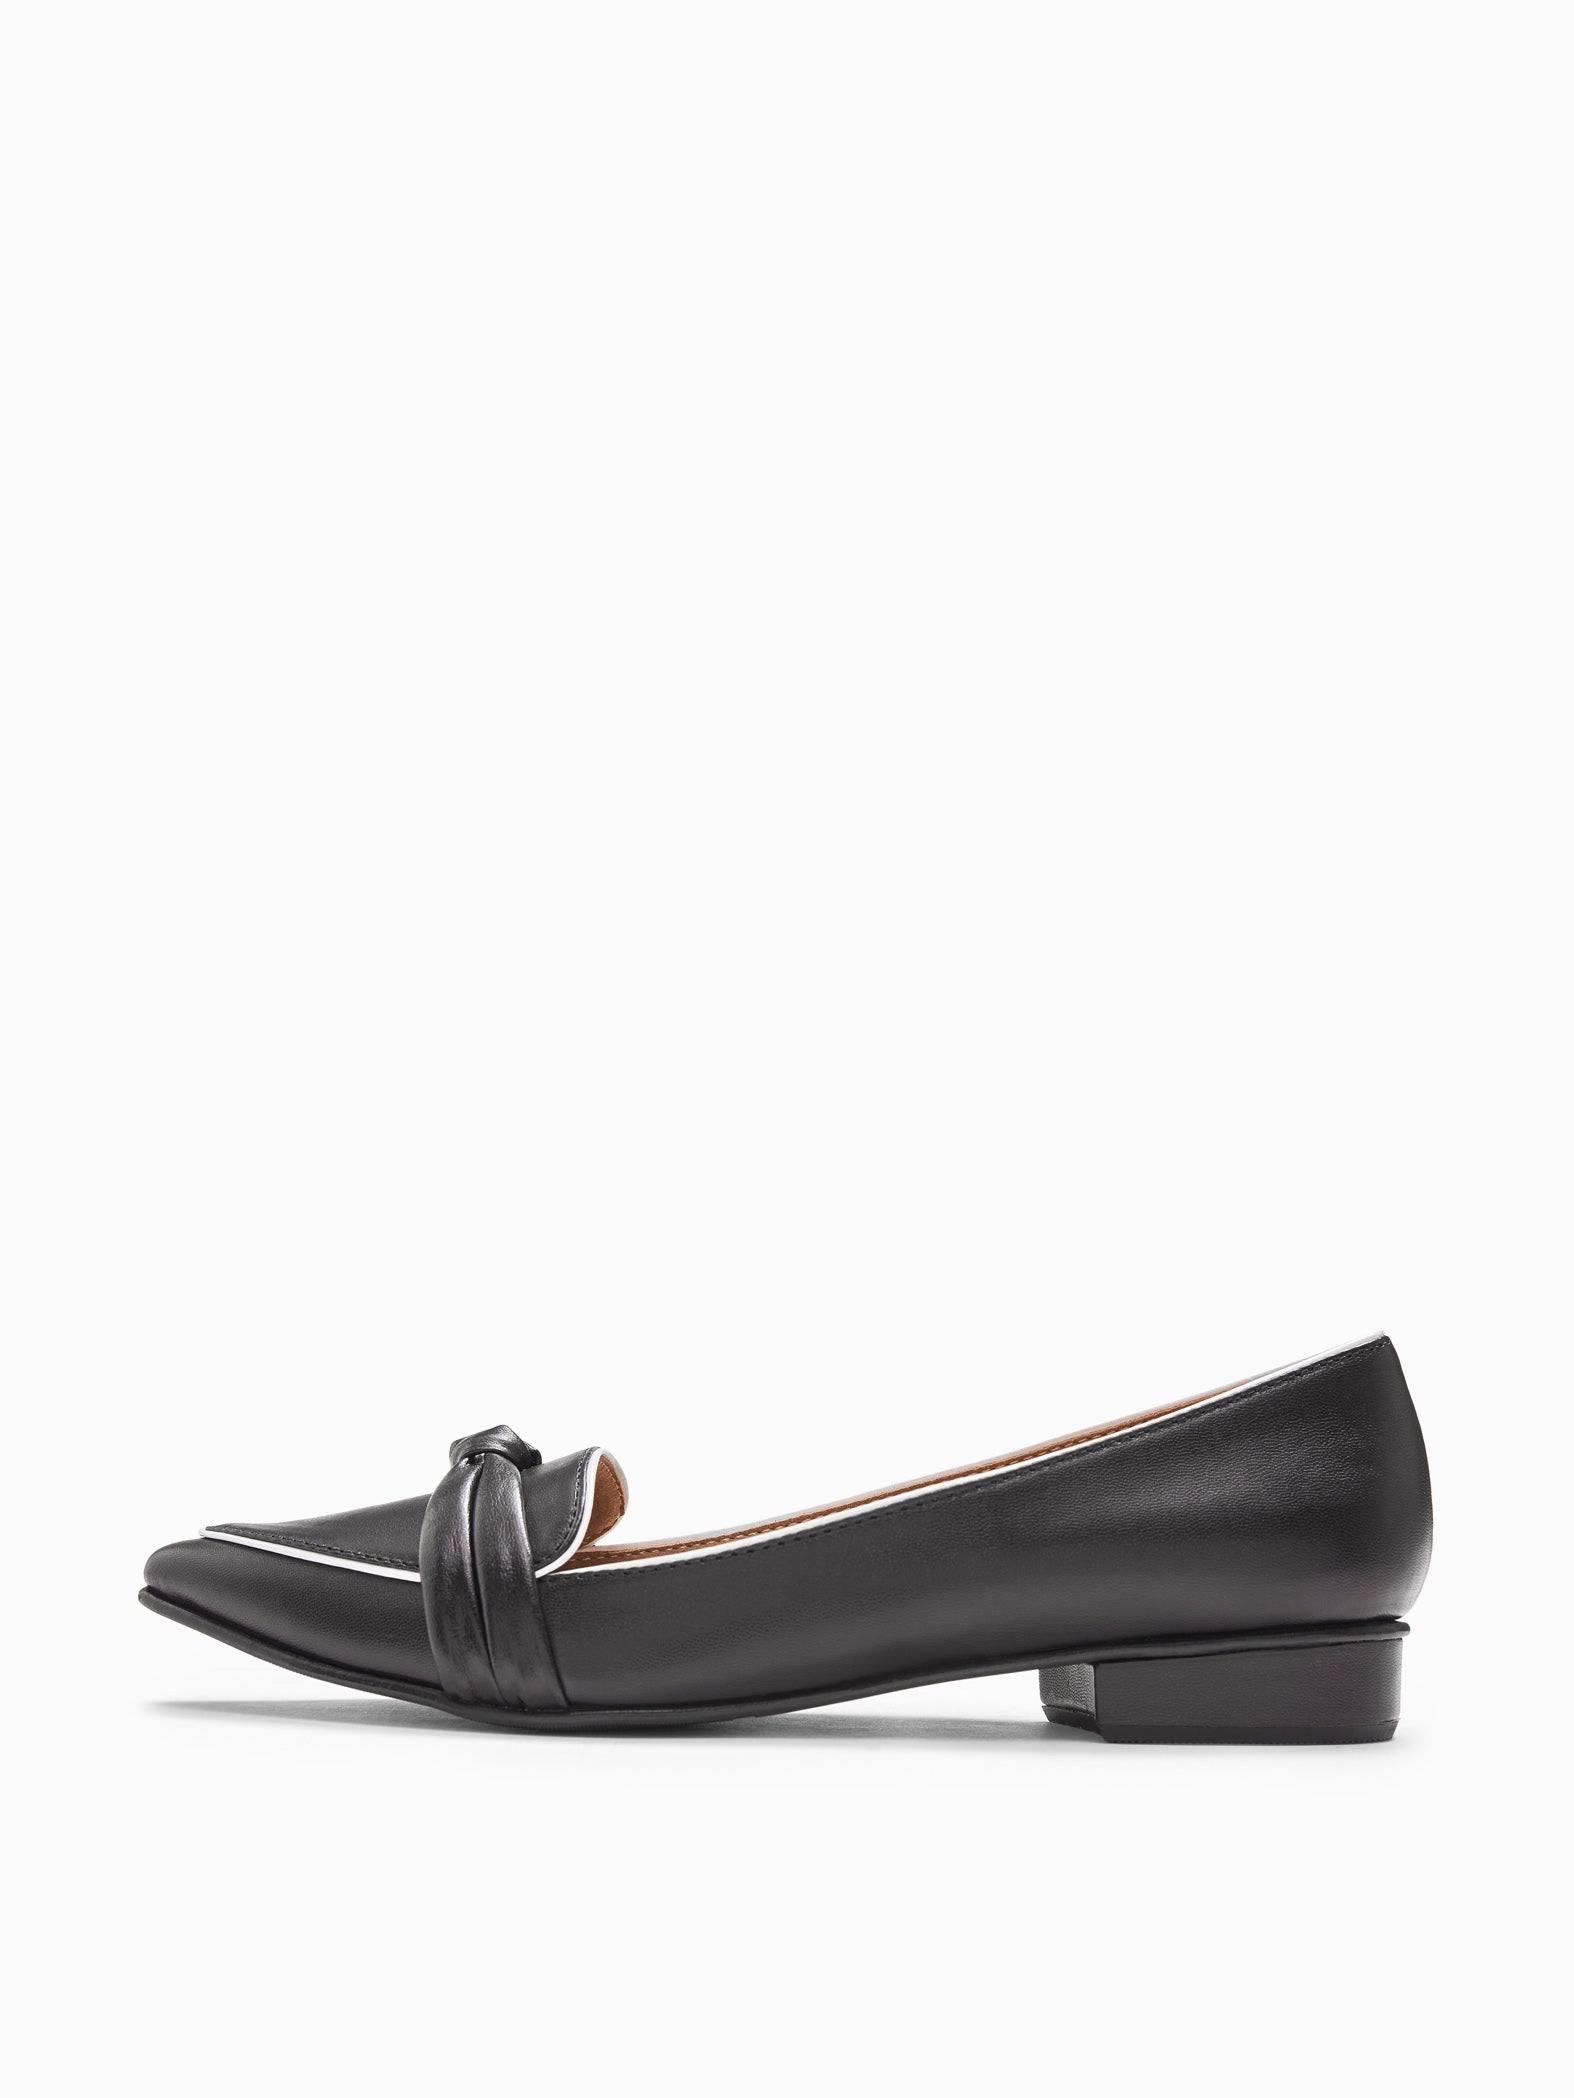 Monochrome knotted loafers